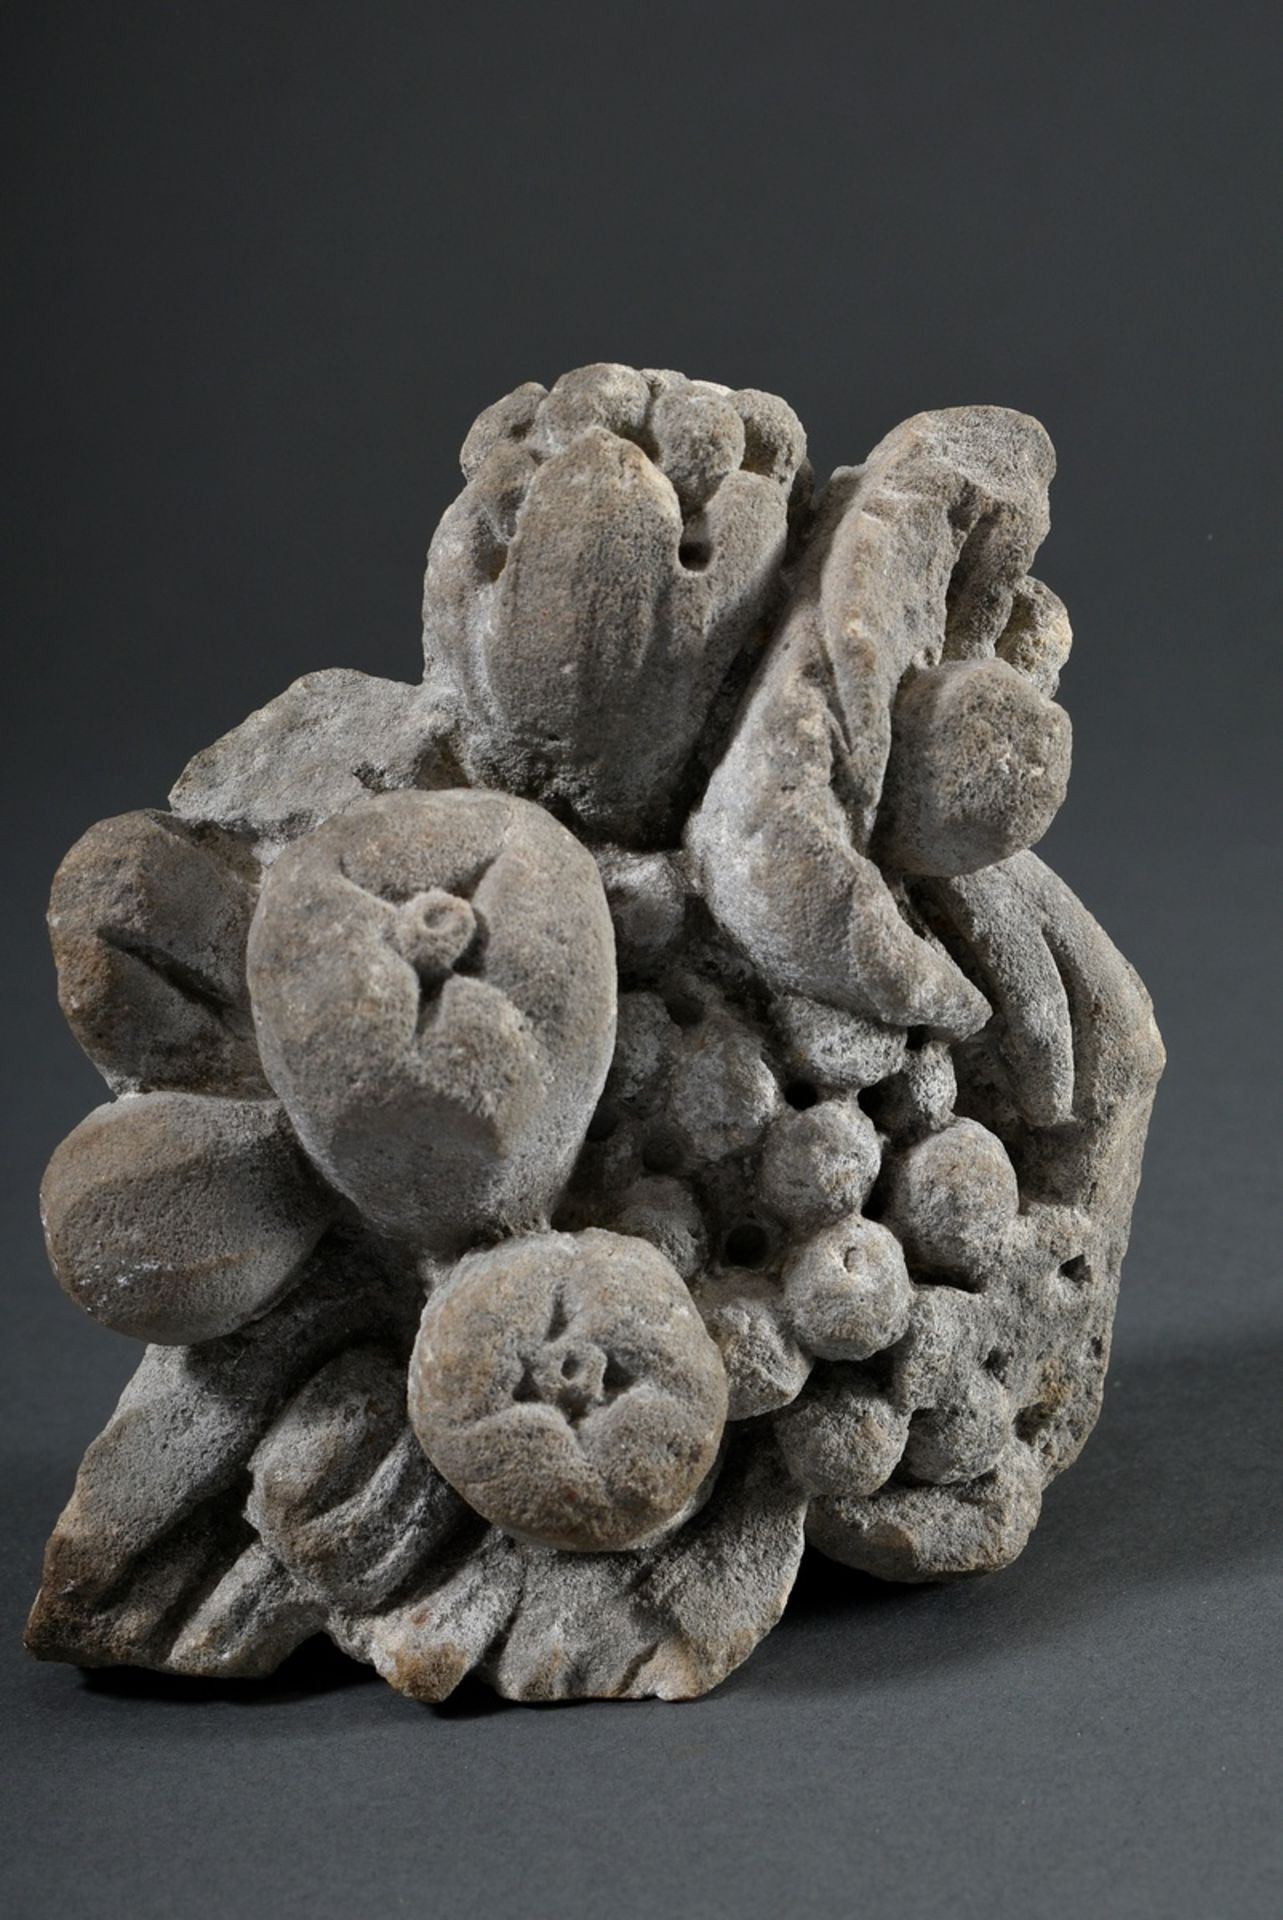 3 Various sandstone fragments "leaf volutes" and "fruits", 9x9,5/9x15/13,5x12,5cm, signs of aging - Image 6 of 8